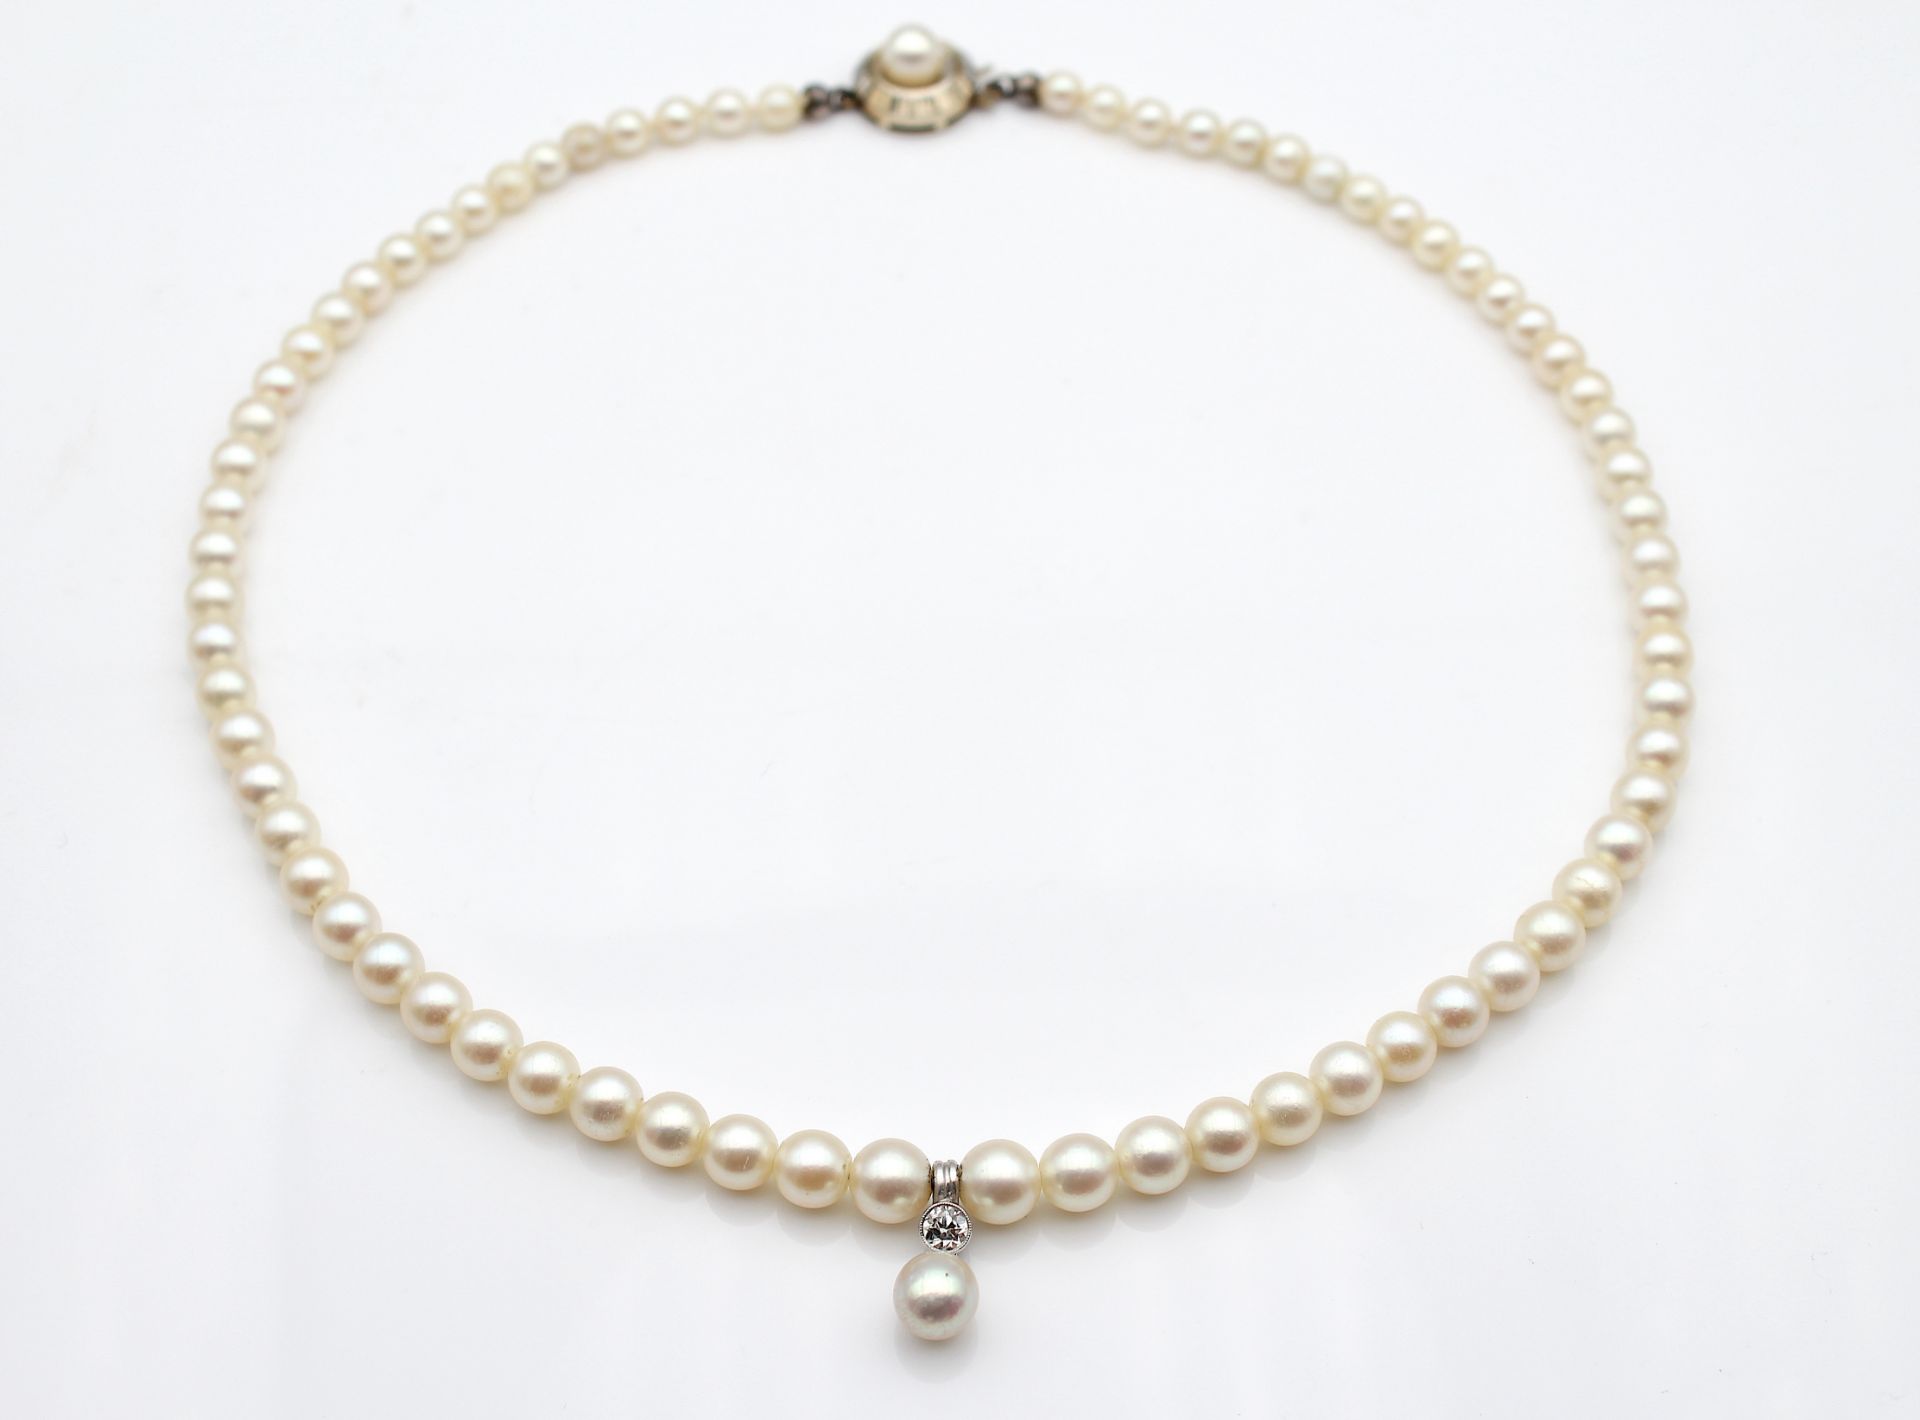 Elegant cultured pearl necklace with a diamond - Image 3 of 3